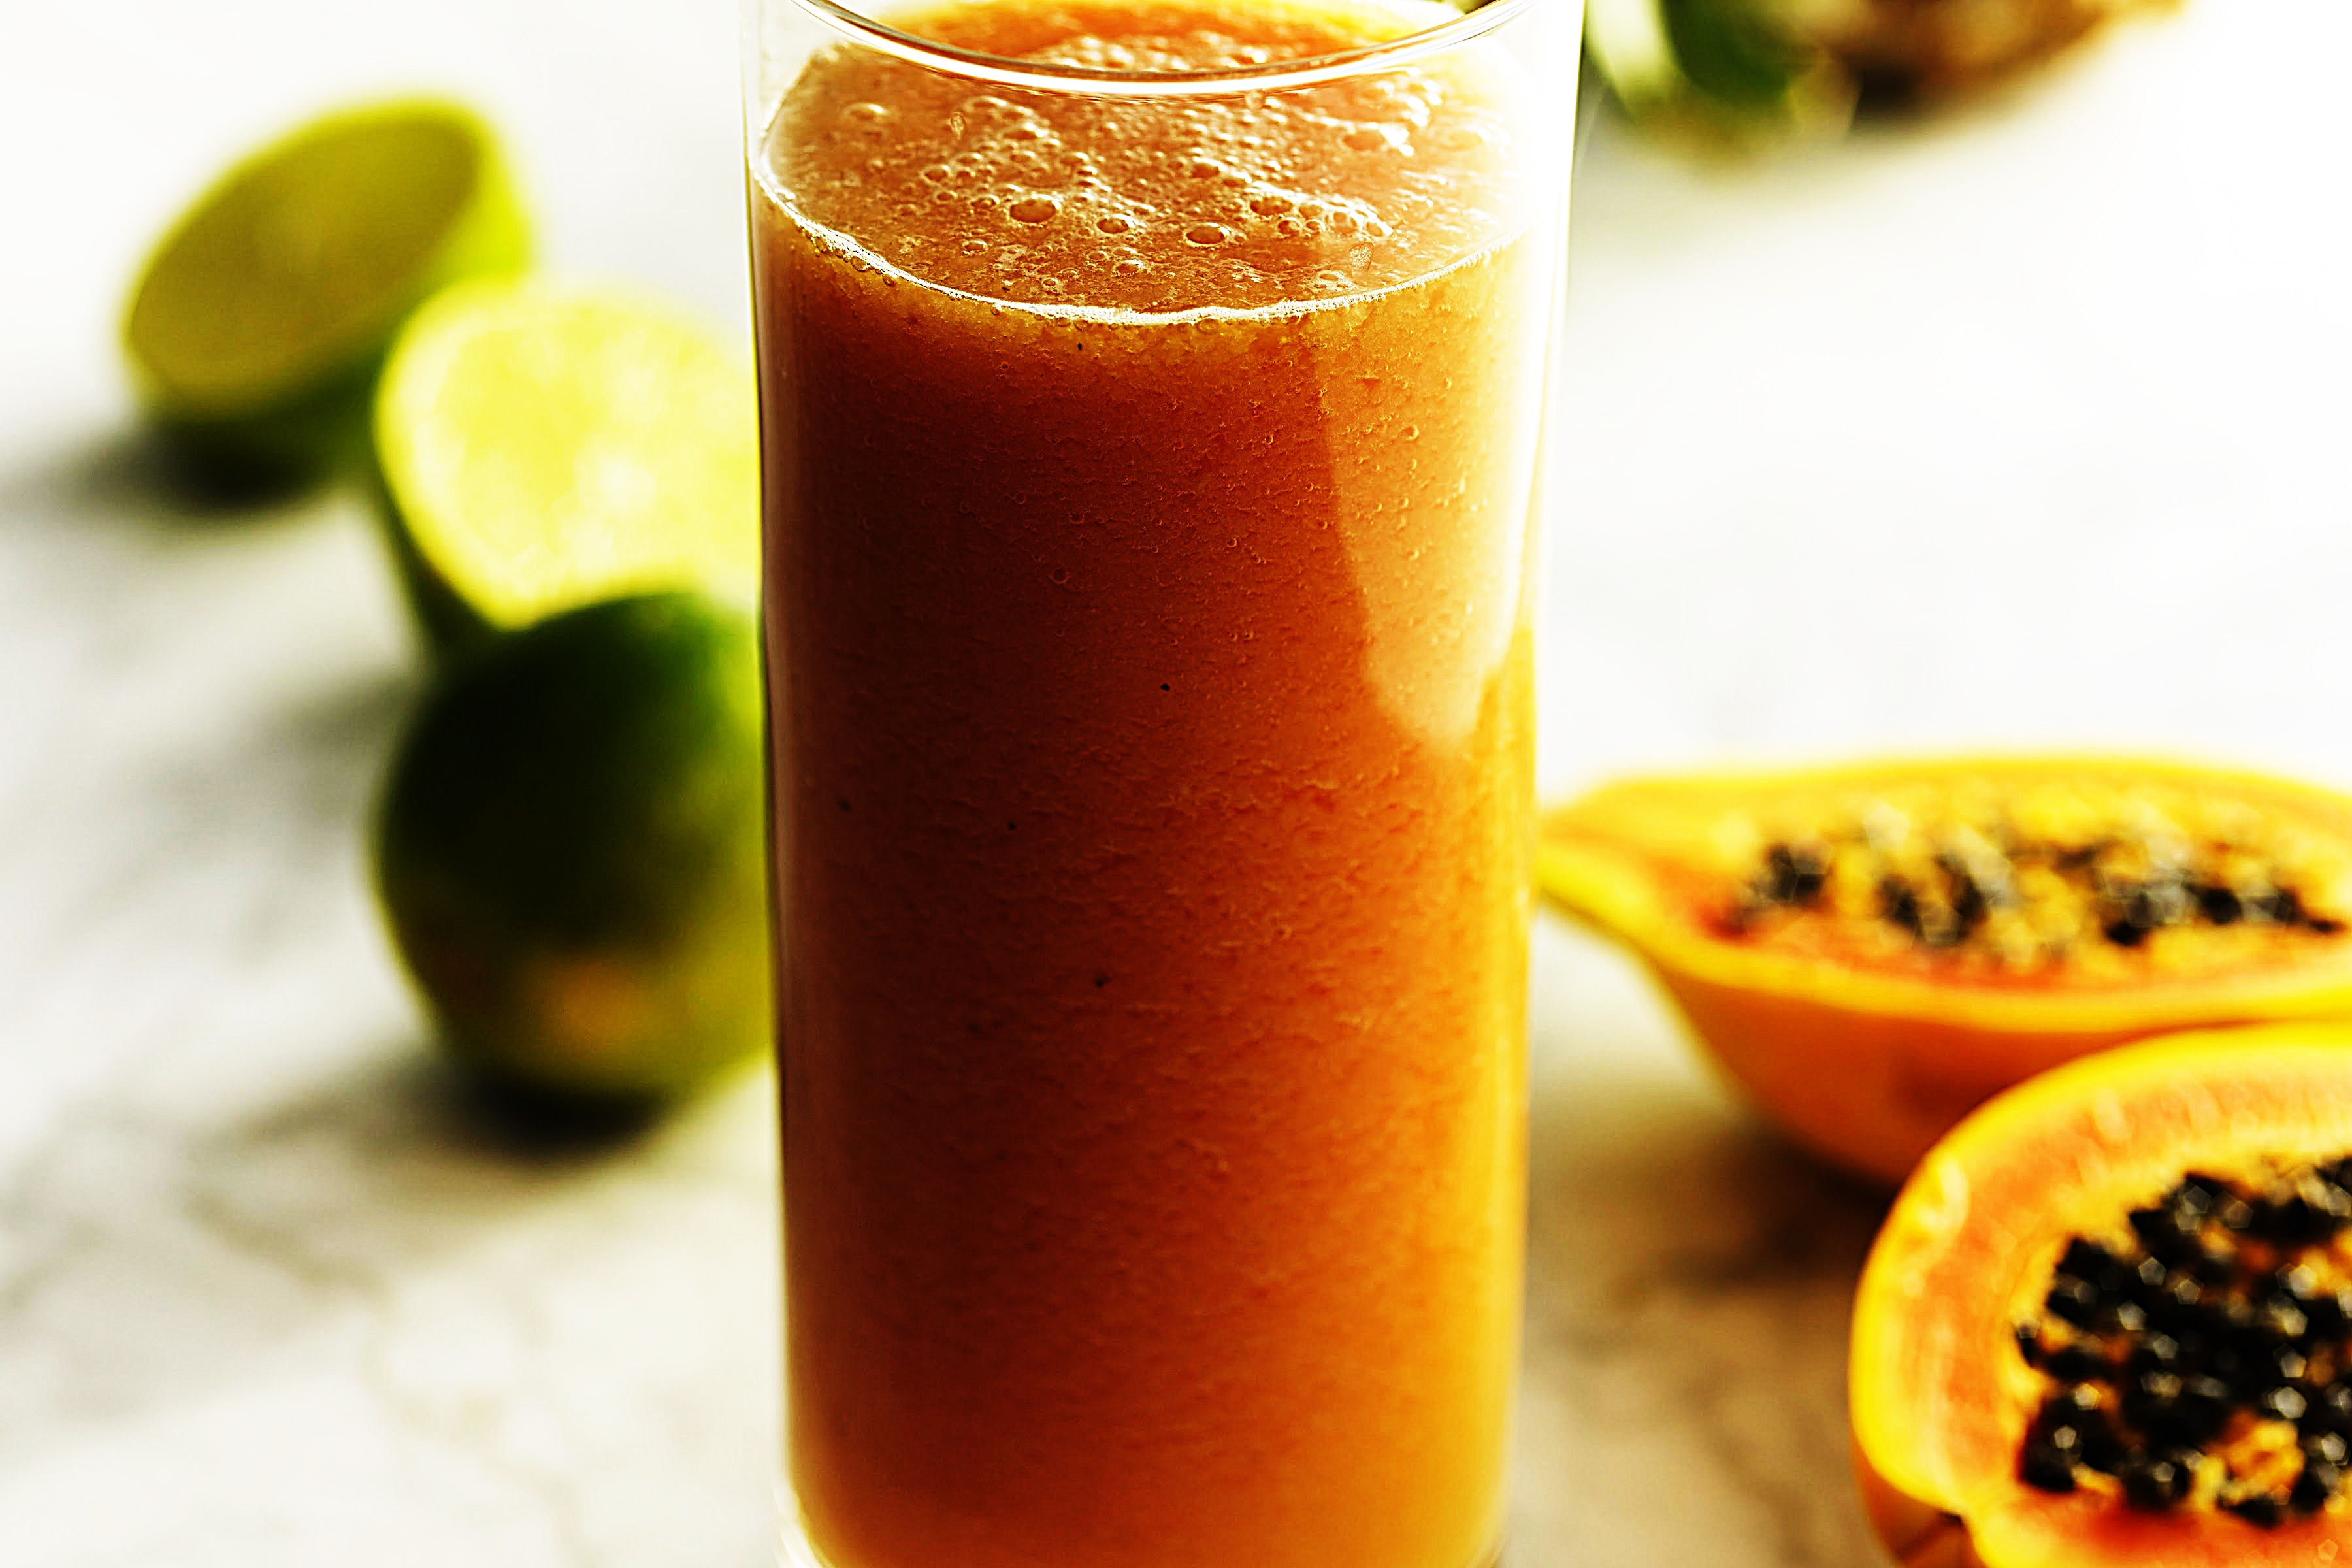 Stupid-Easy Recipe for Tropical Smoothie (Pineapple, Papaya, Coconut, Lime Smoothie) (#1 Top-Rated)